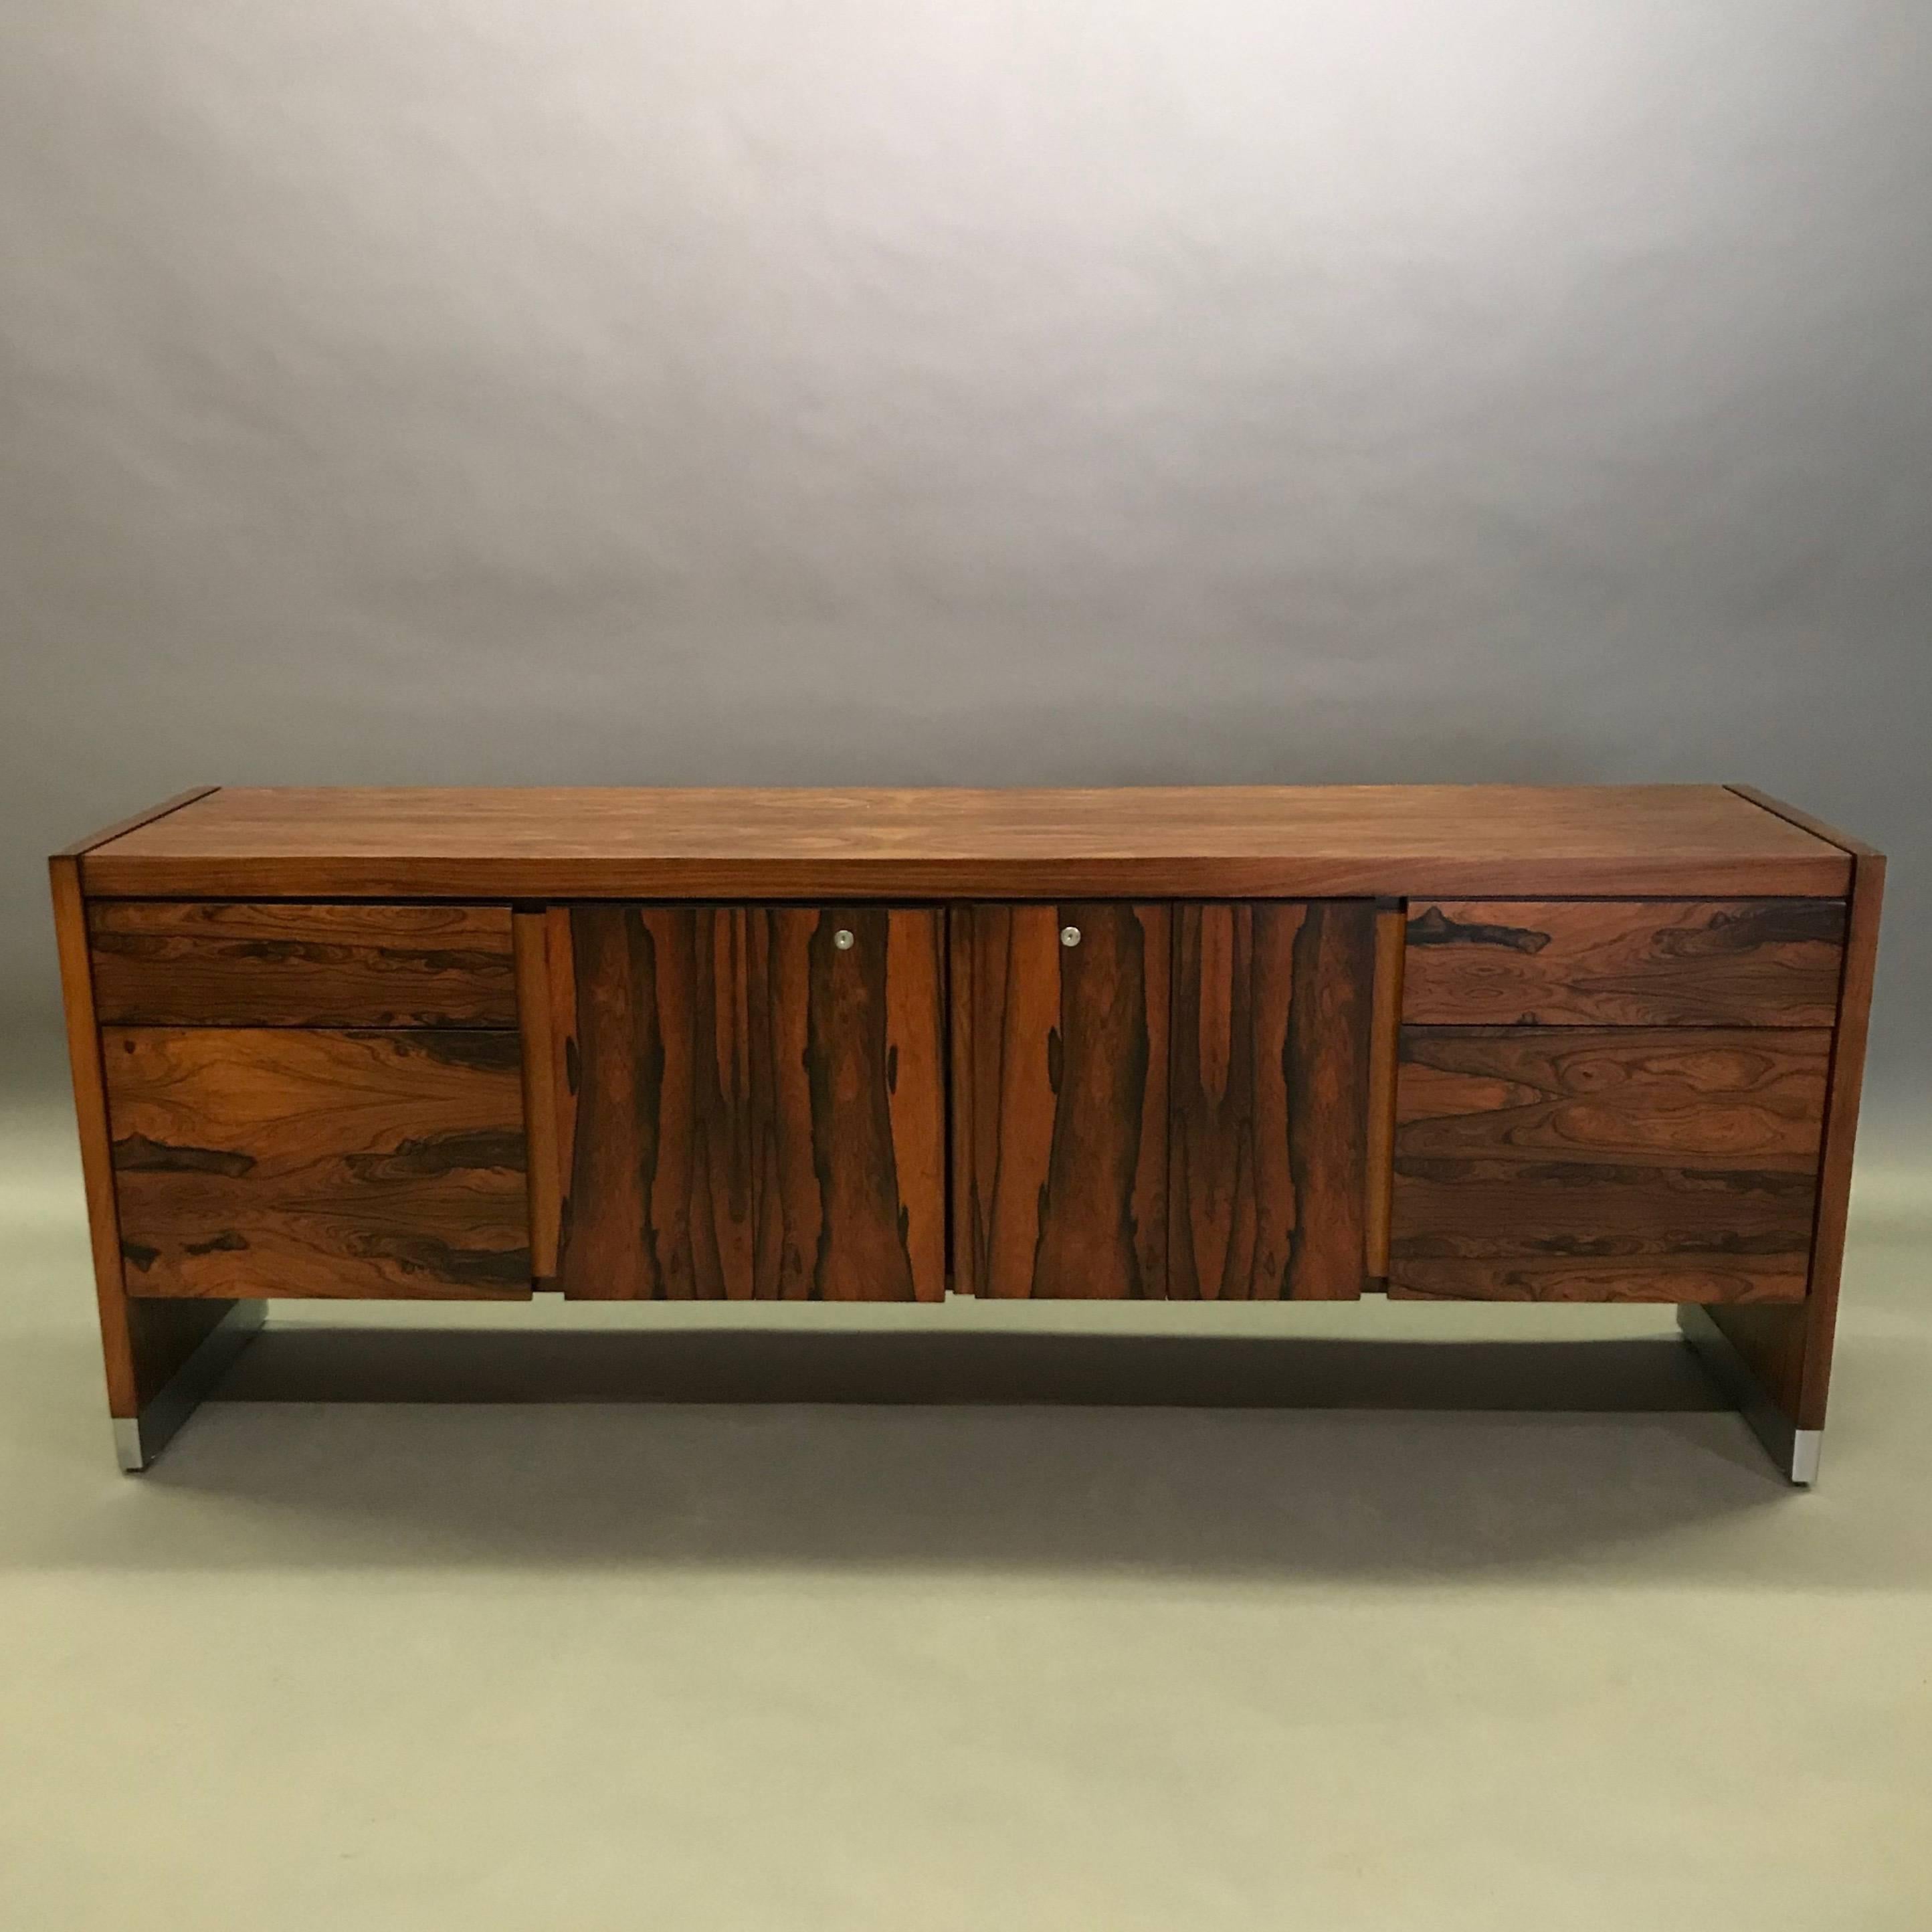 Handsome, 1970s, rosewood veneer, office credenza with chrome details features four drawers and center shelving storage in the center. The back is finished so the credenza can float in a room.